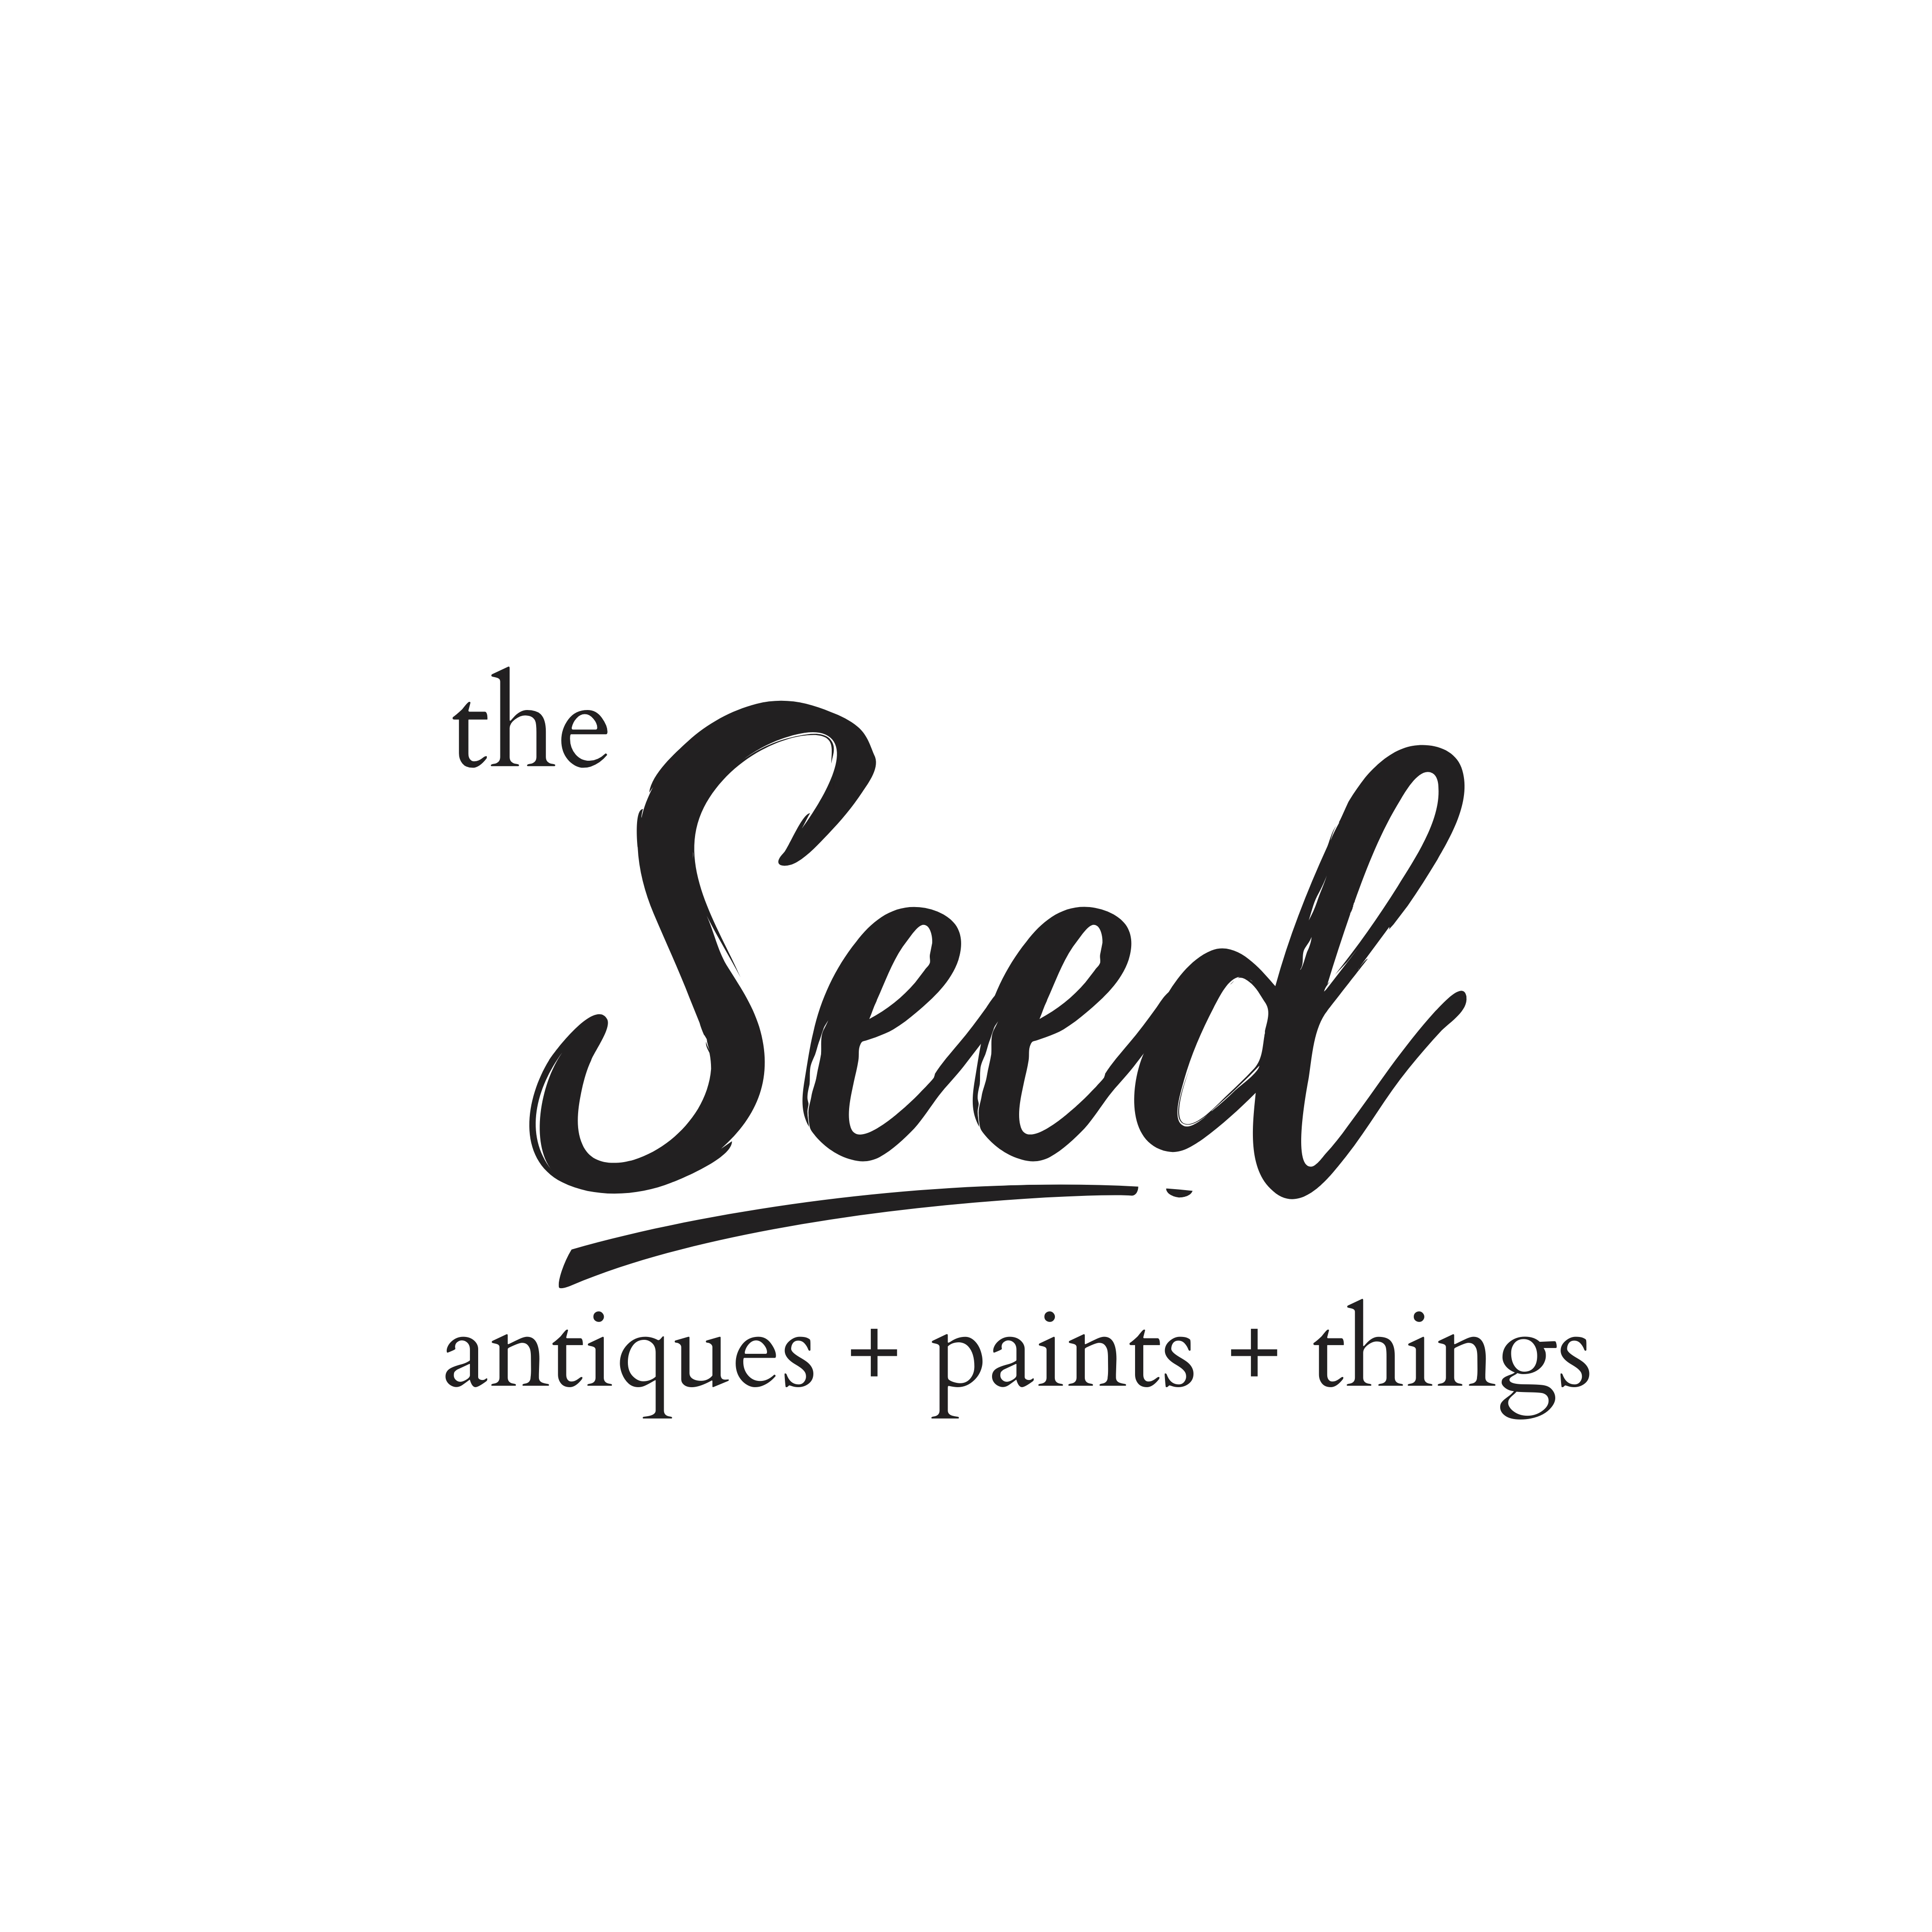 The-Mustard-Seed-Collection-The-Seed-Logo.webp